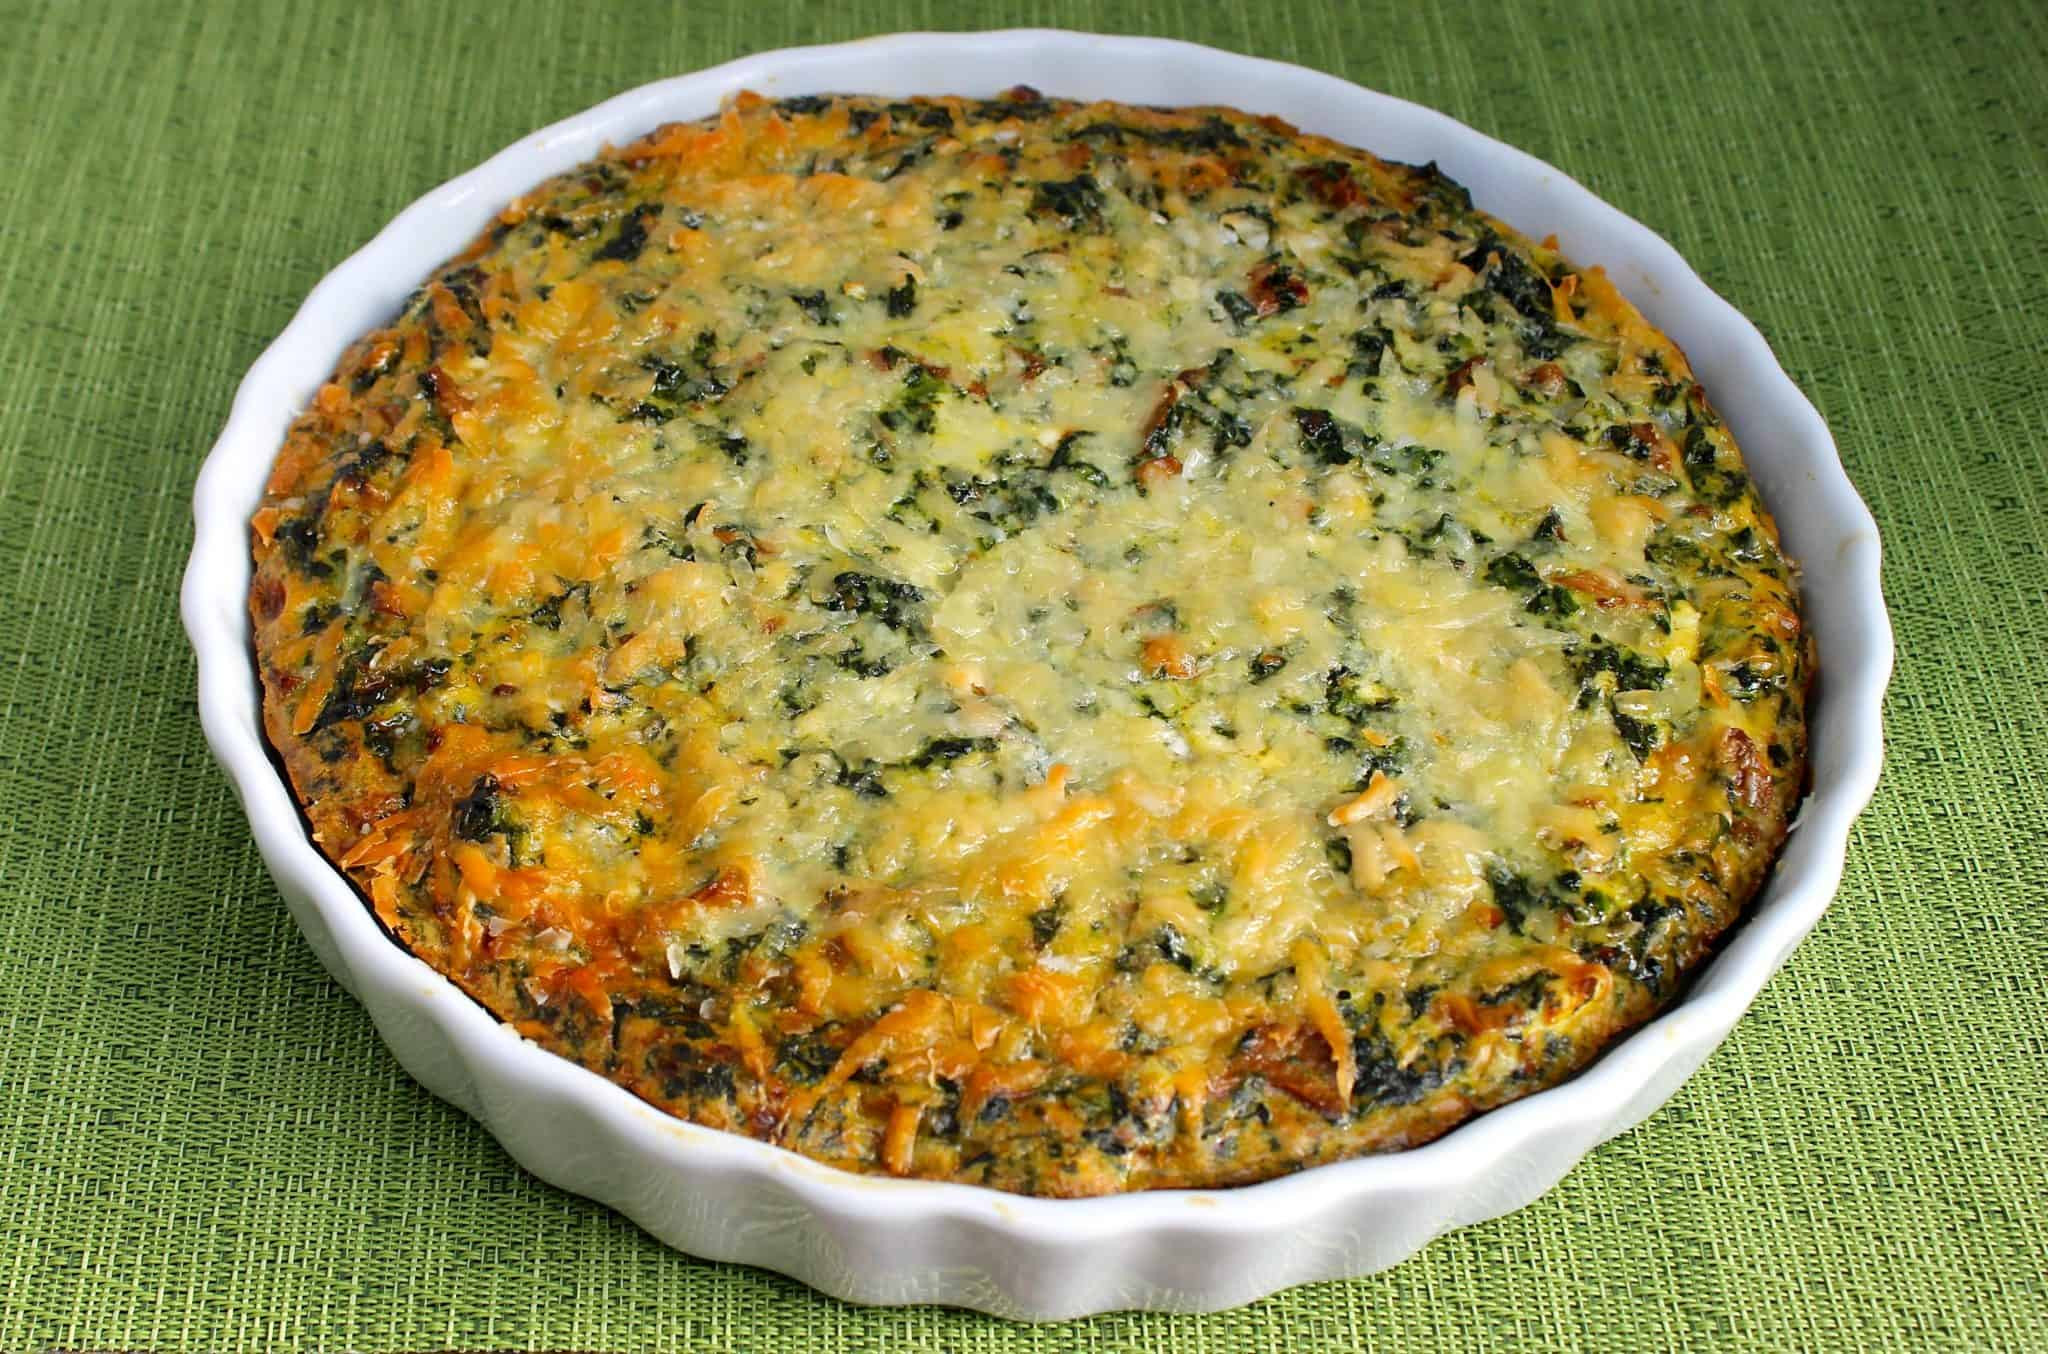 15 Recipes for Great Crustless Spinach Mushroom Quiche